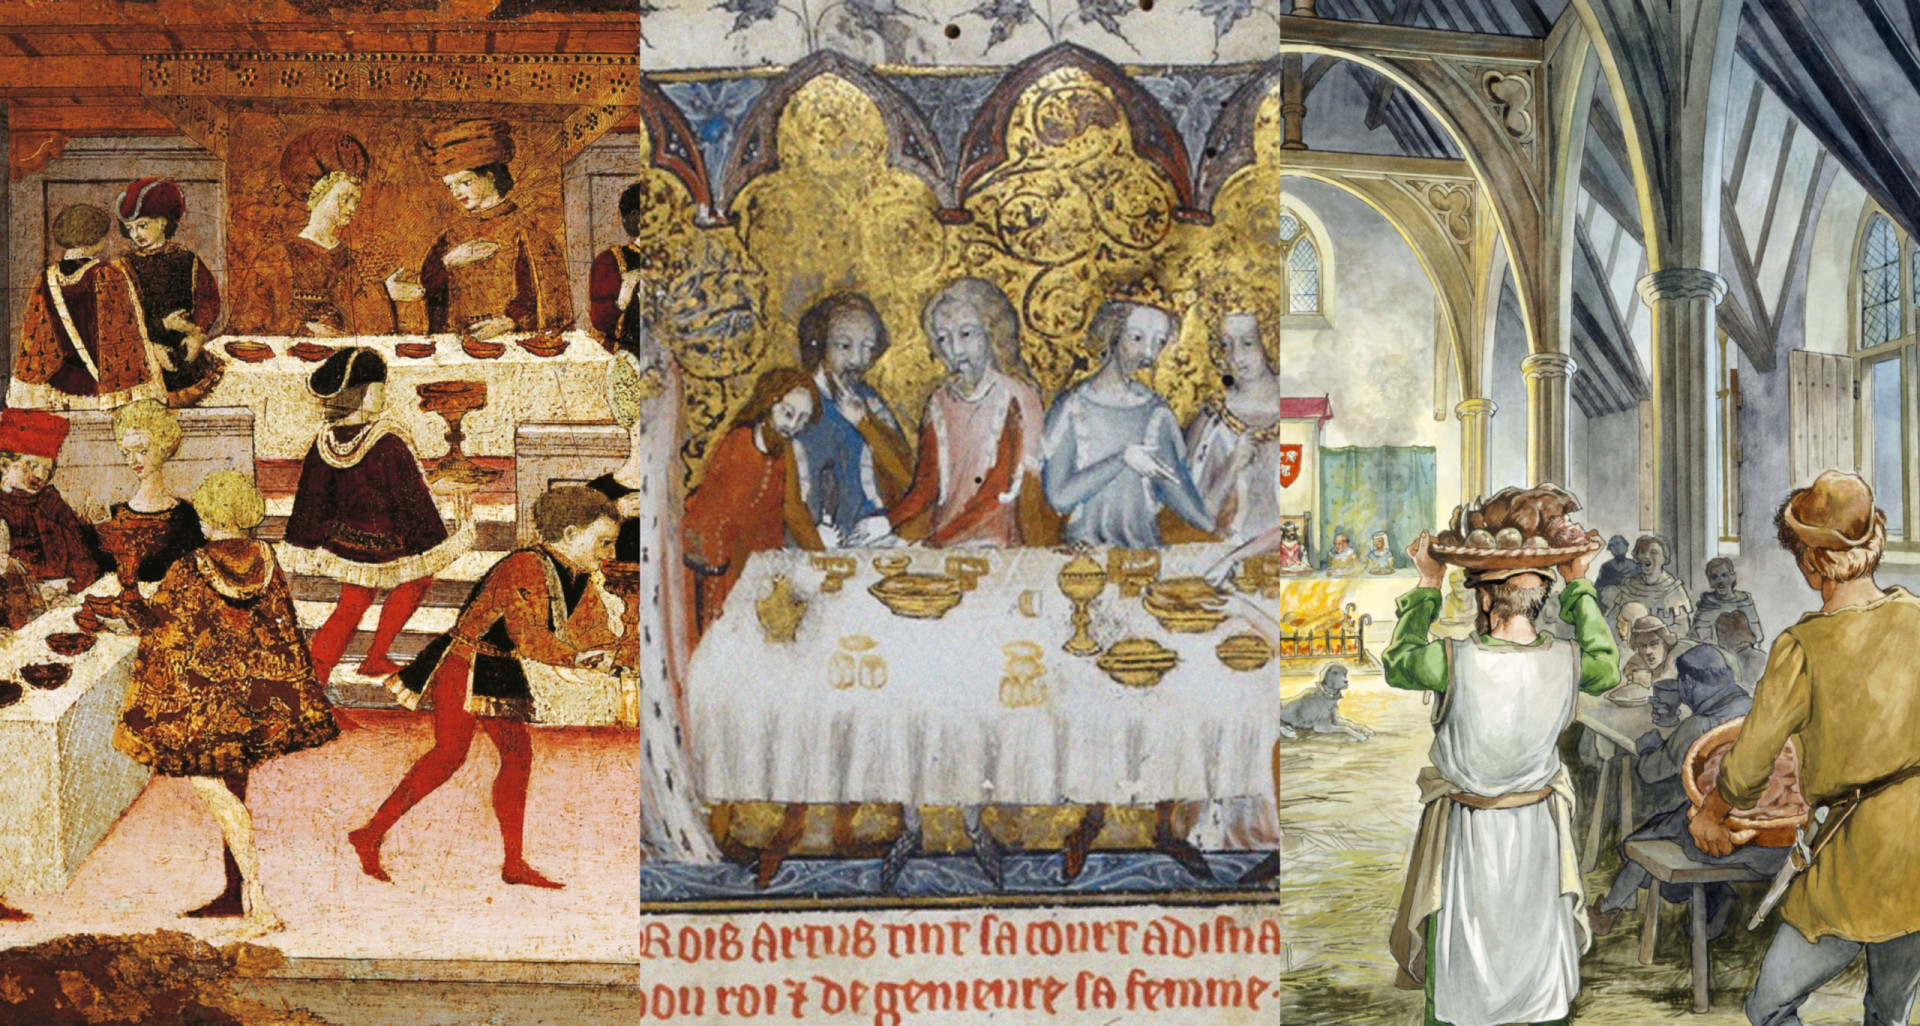 How to throw a feast the Medieval way